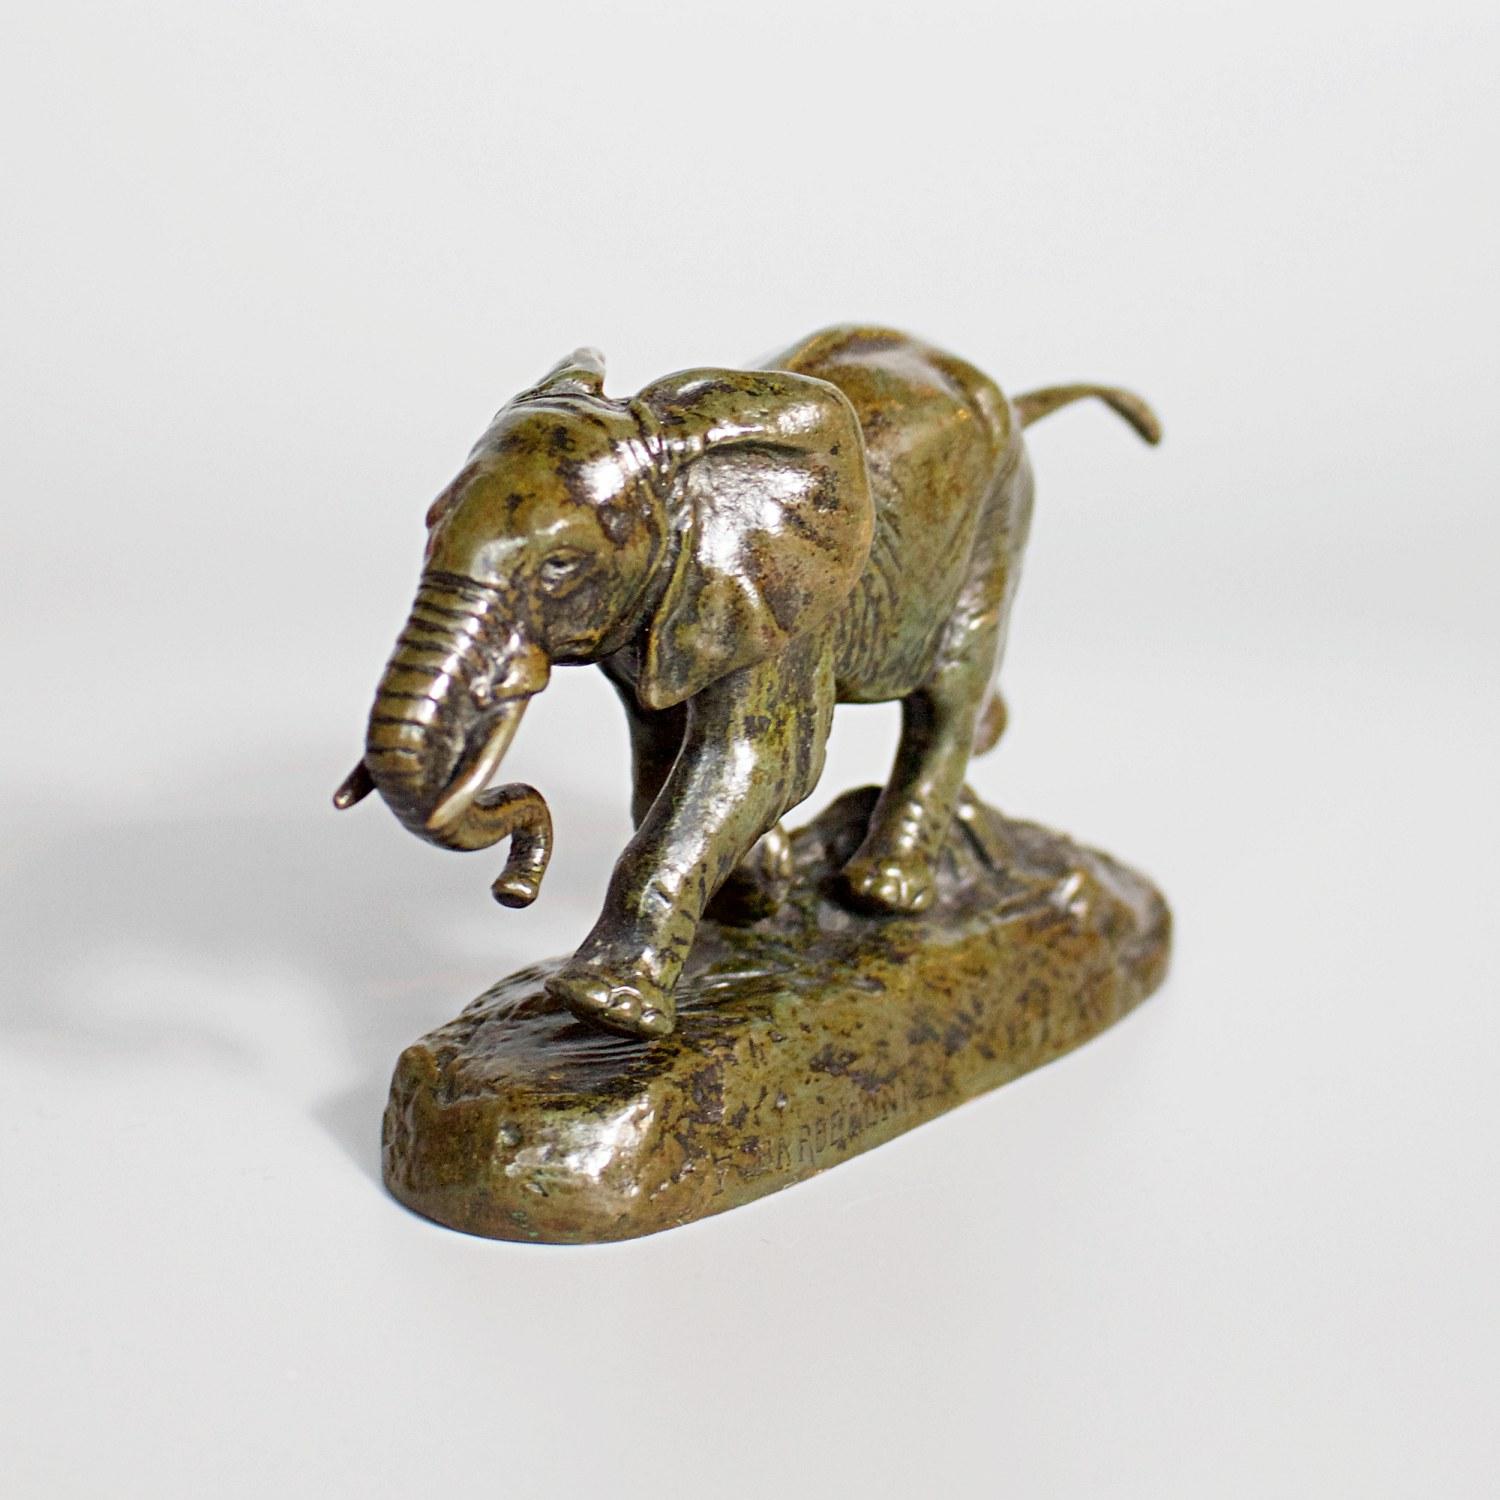 A late 19th century bronze sculpture by Antoine-Louis Barye (1795-1875) of a small proportioned, charging African Elephant. Rich green patination and hand chased detail. Signed Barye and inscribed F Barbedienne.

Dimensions: H 9.4cm, W 6.5cm, D